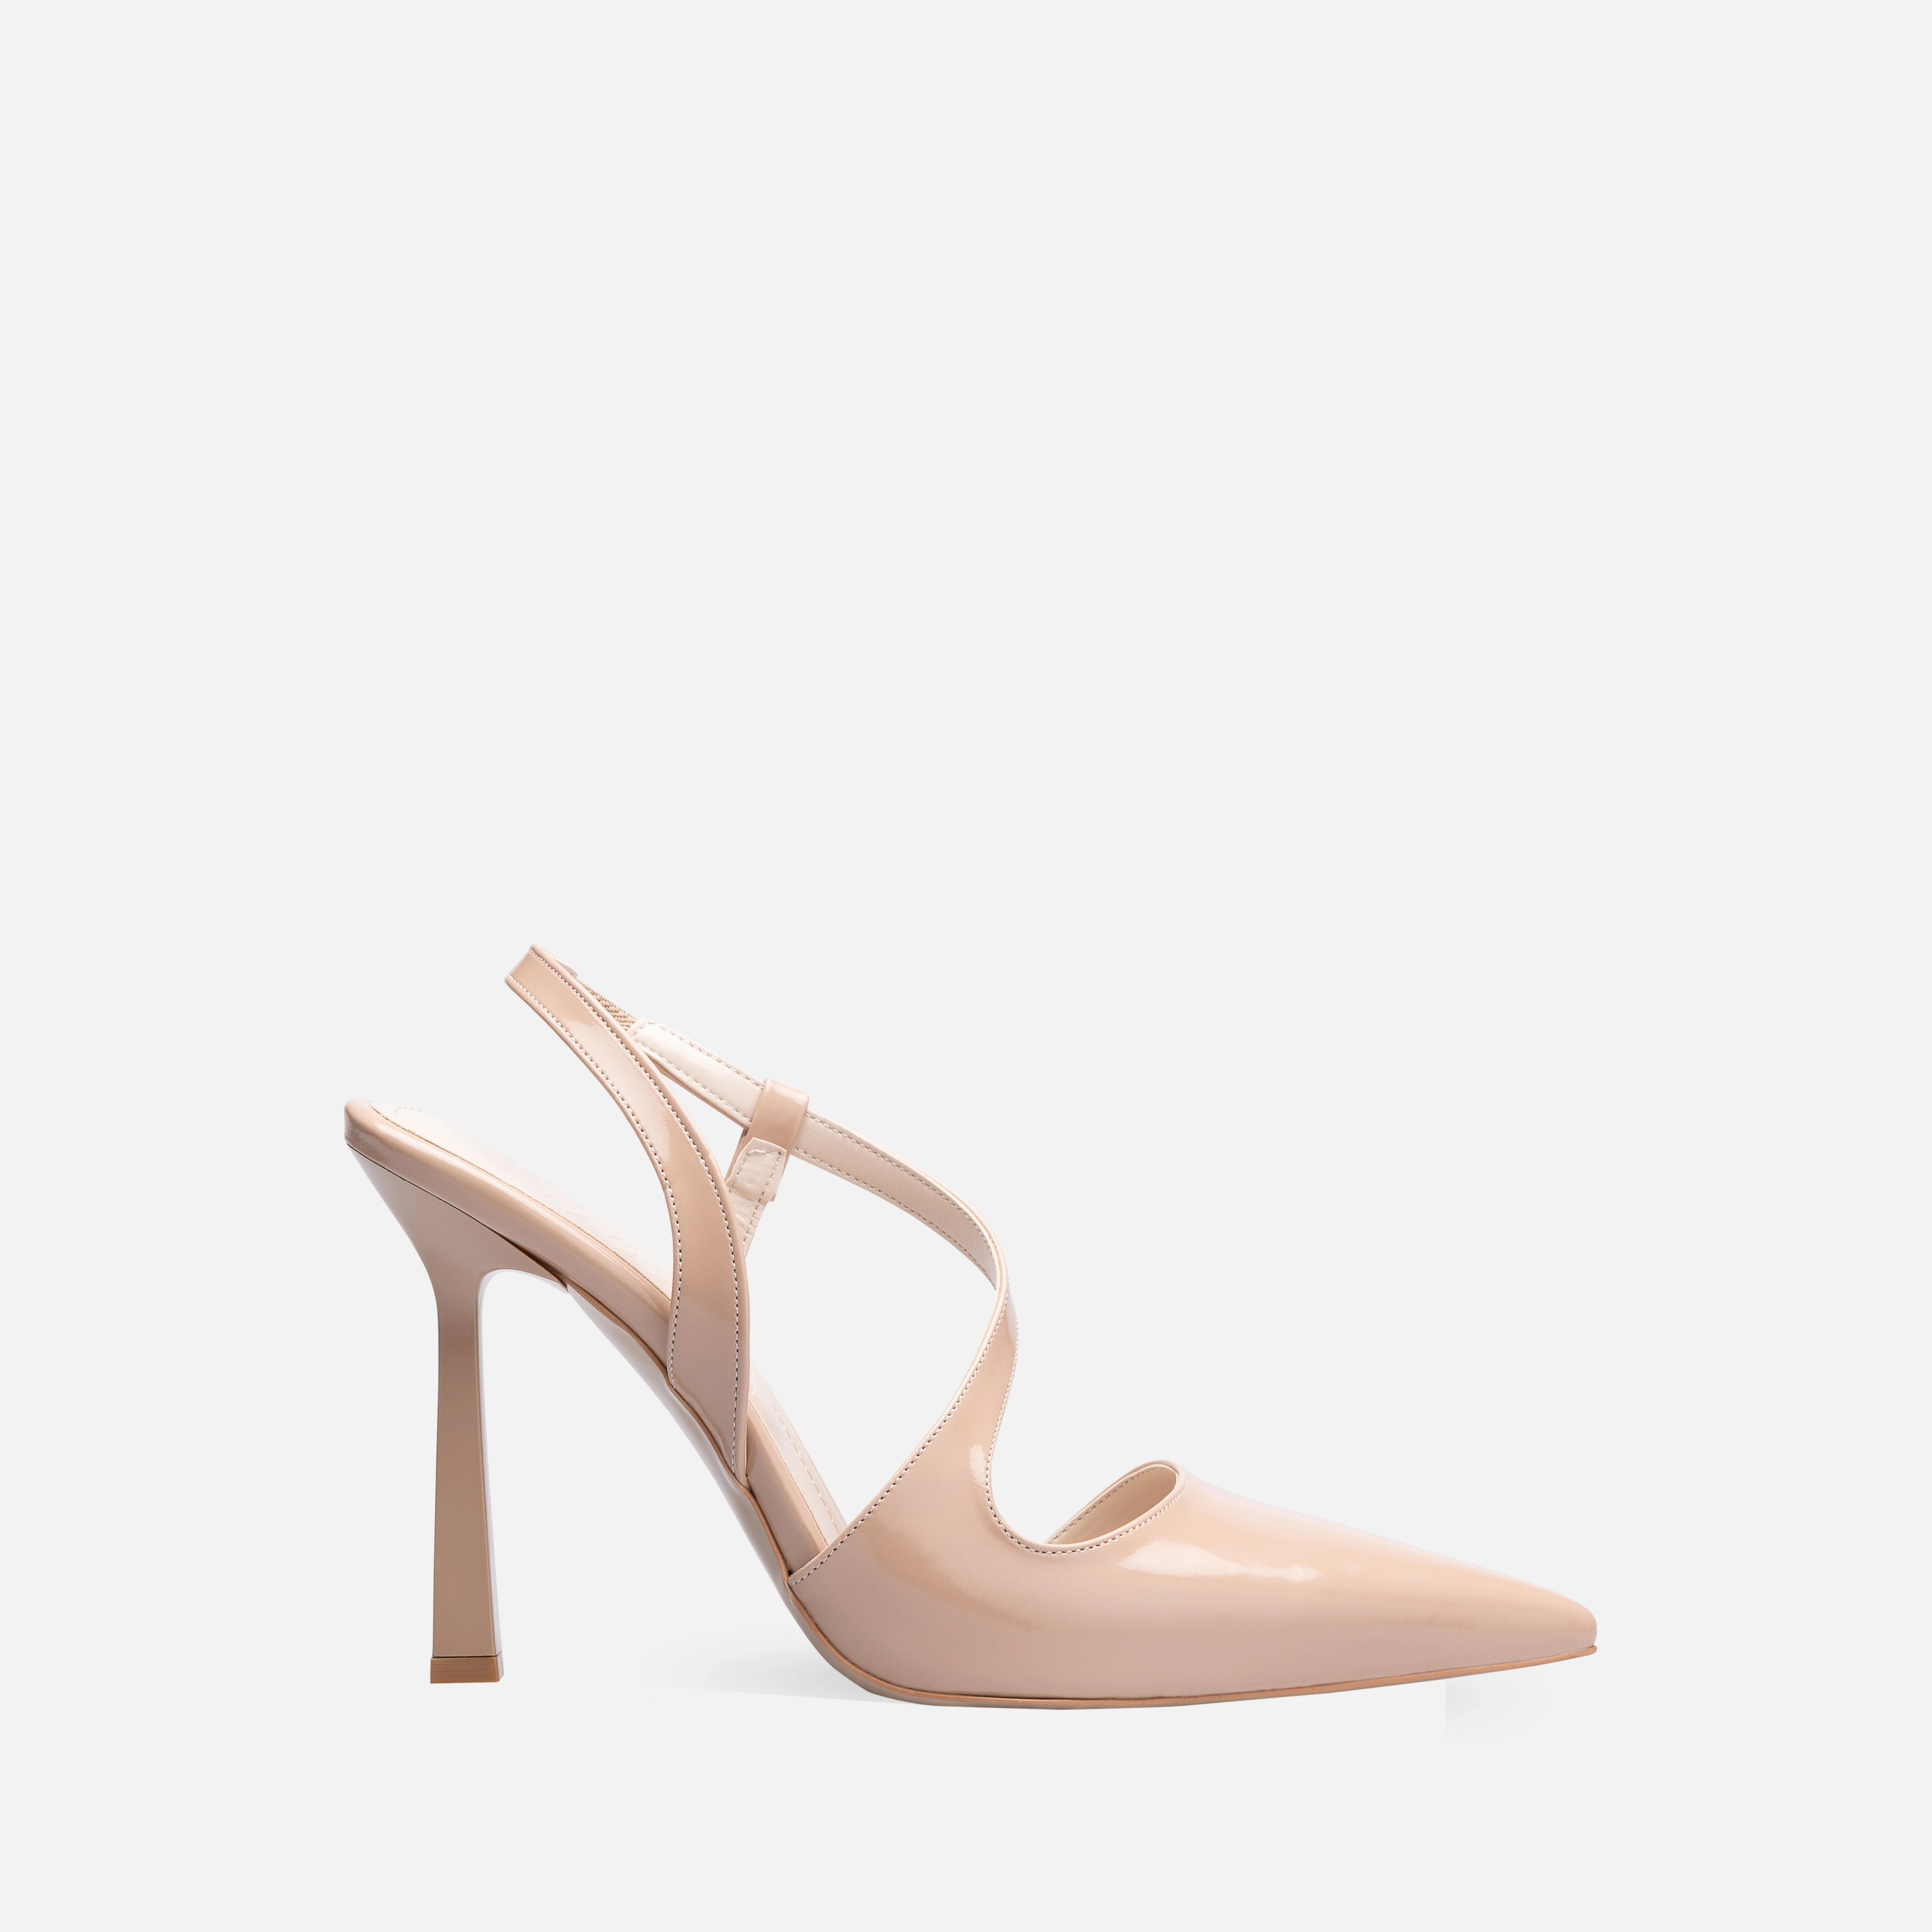 Patent Leather Thin High Heeled Pumps - Neutral